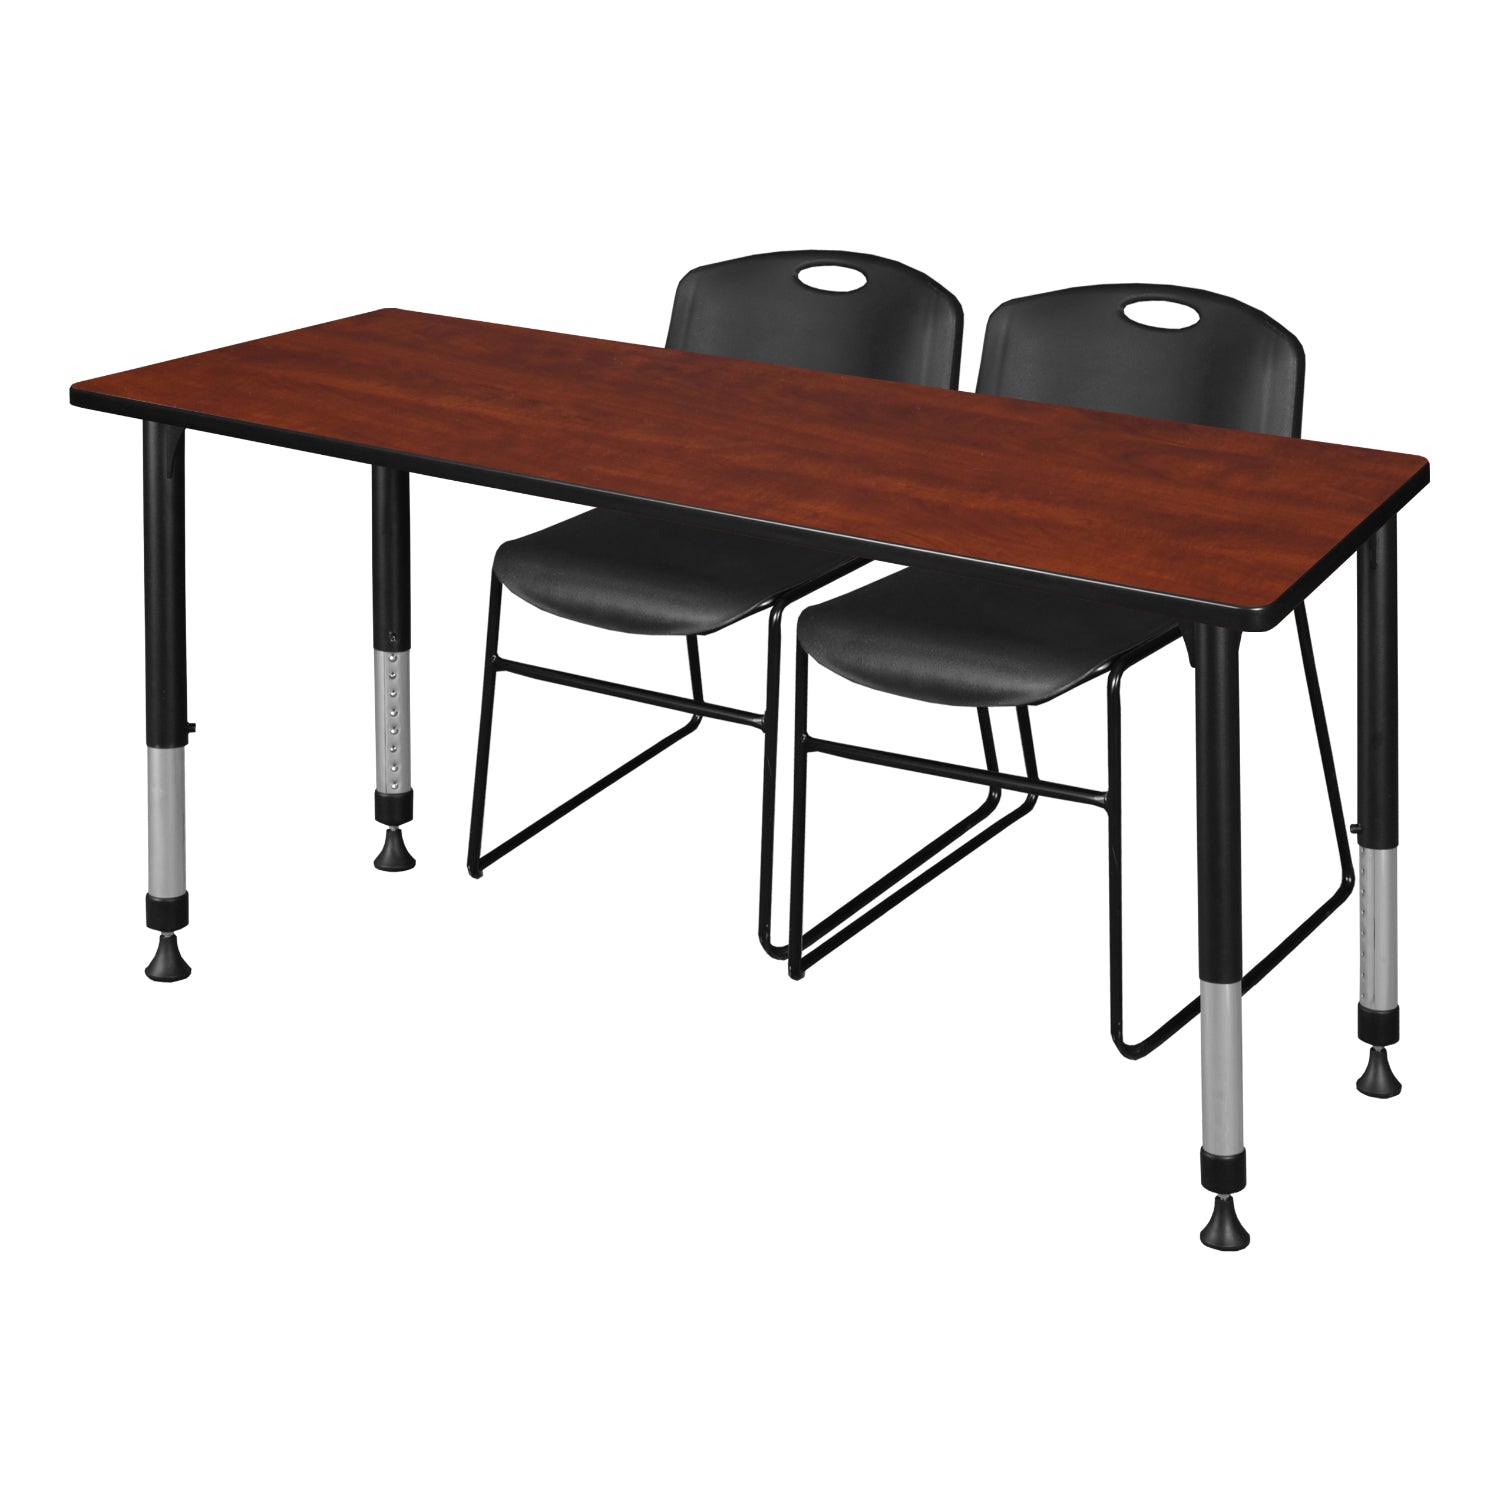 Kee Classroom Table and Chair Package, Kee 60" x 24" Rectangular Adjustable Height Table with 2 Black Zeng Stack Chairs